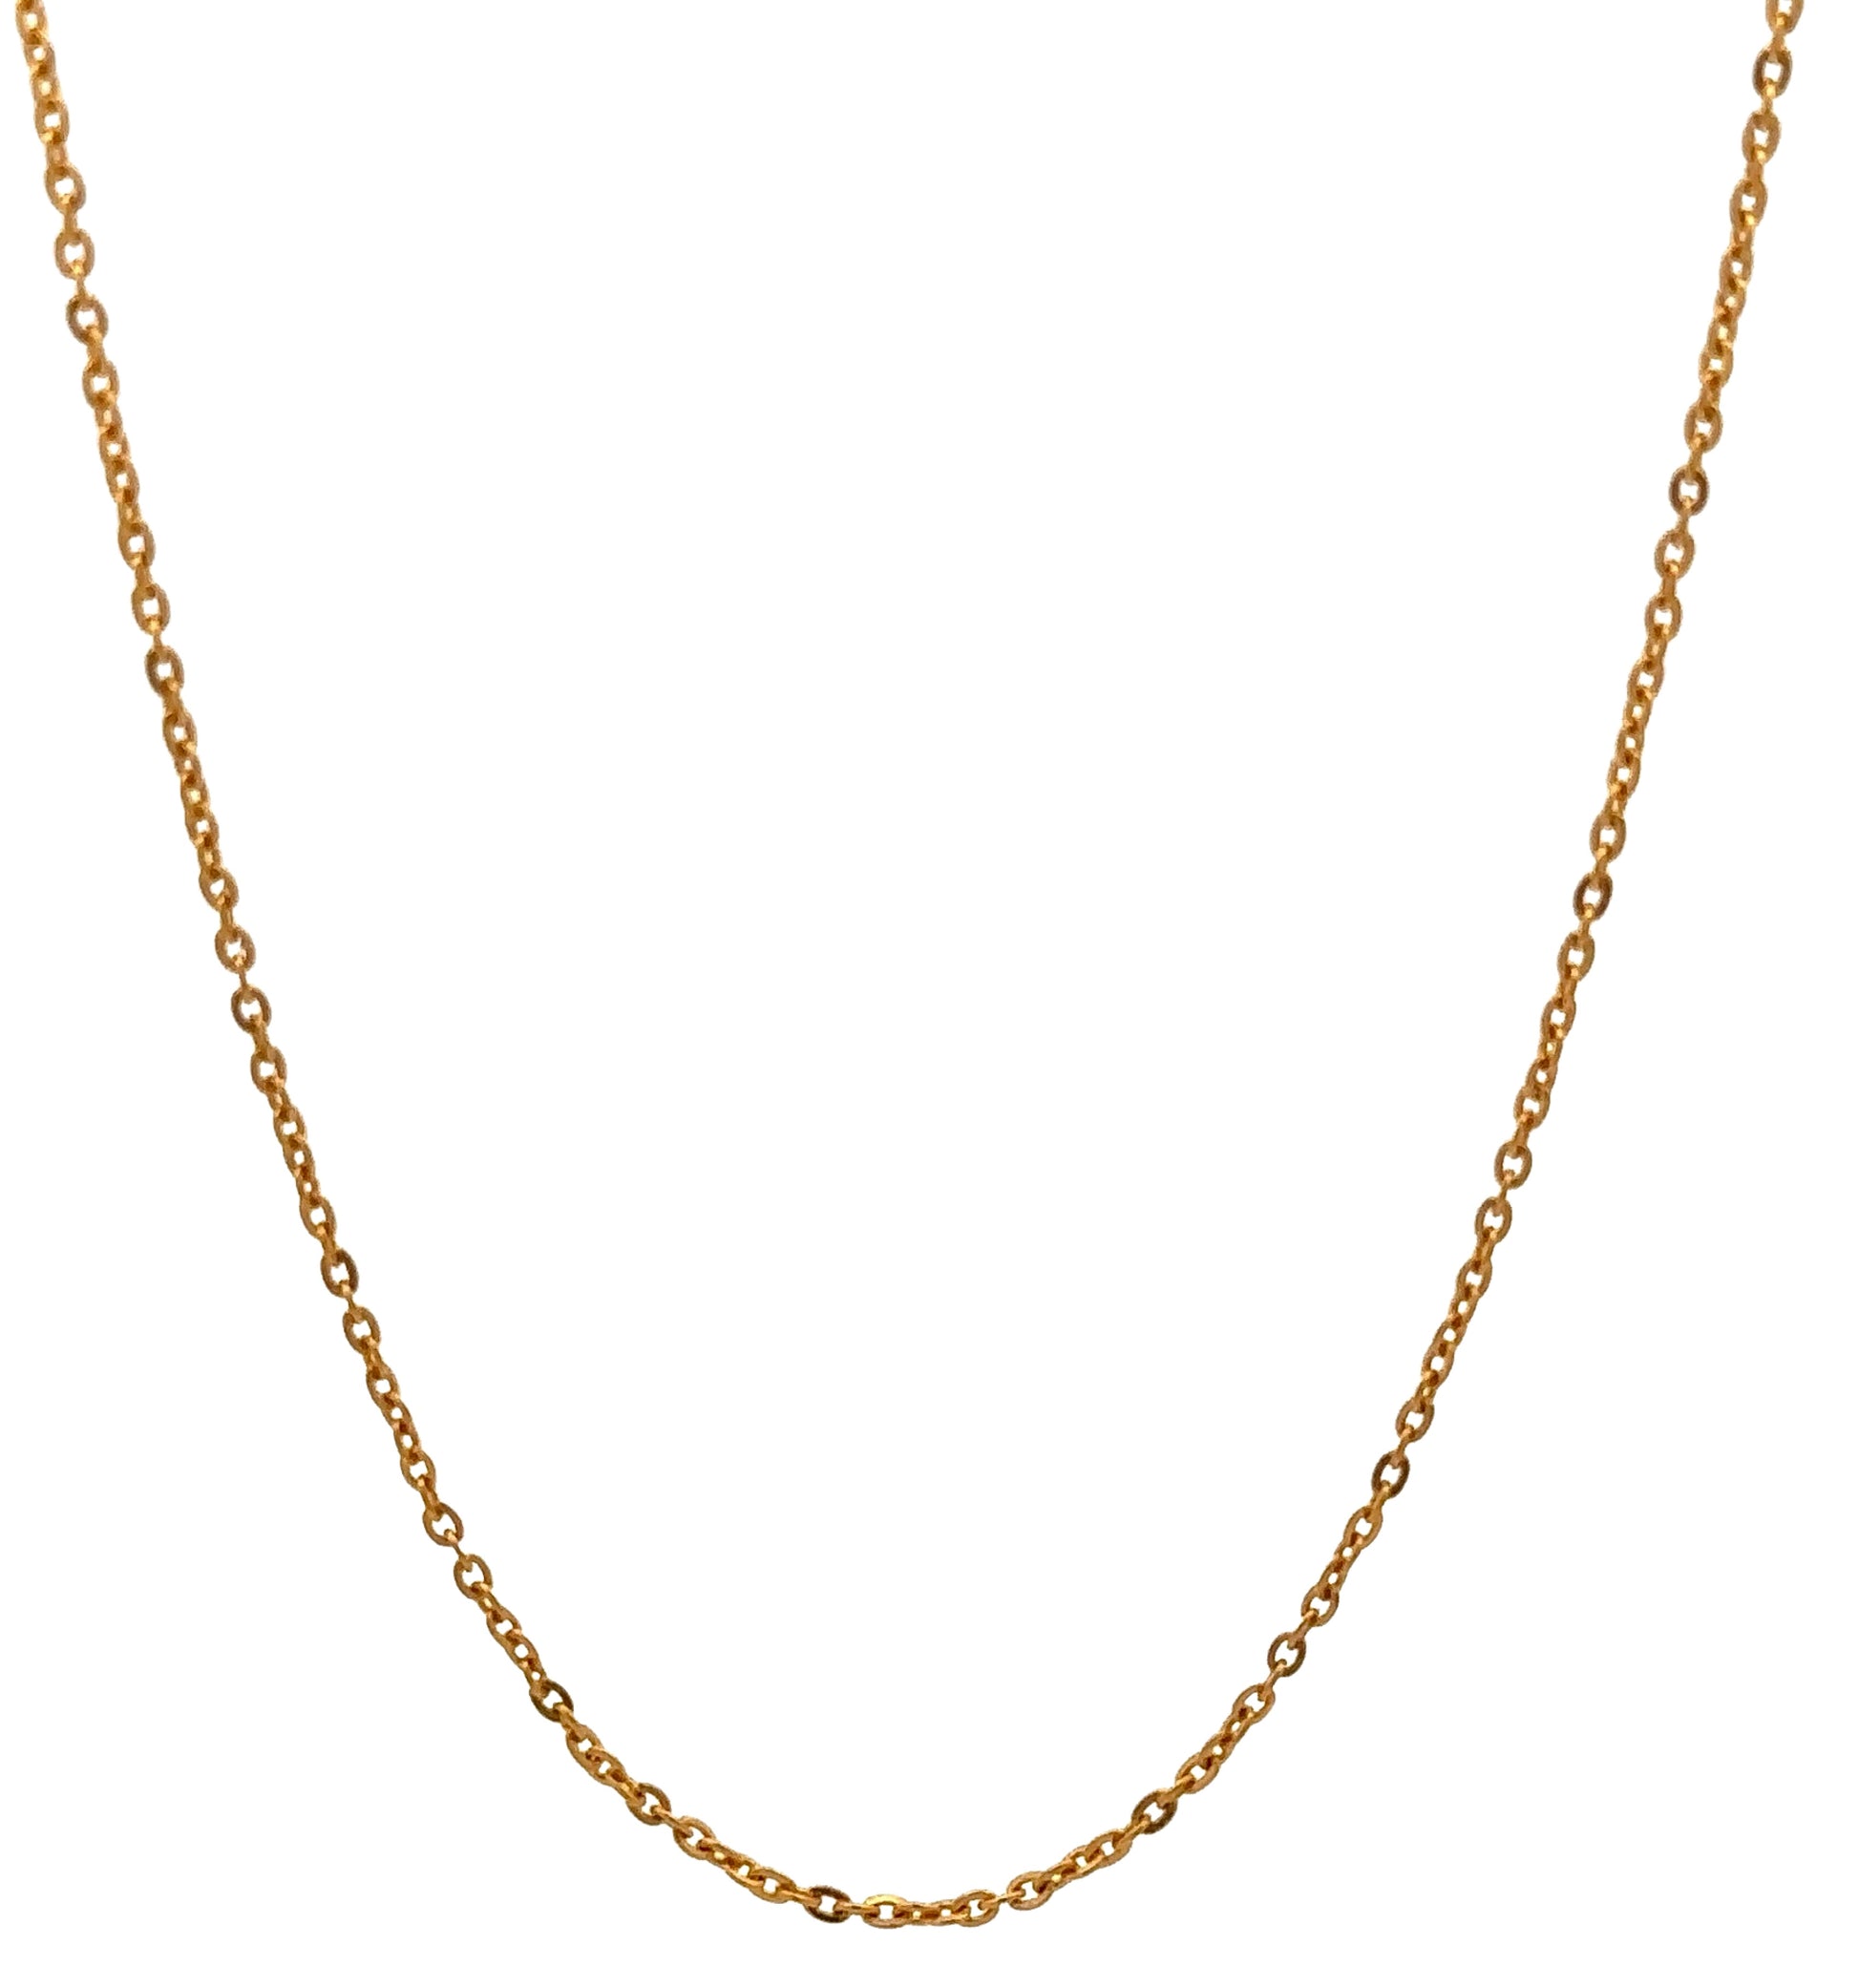 hanging 22k yellow gold thin link chain